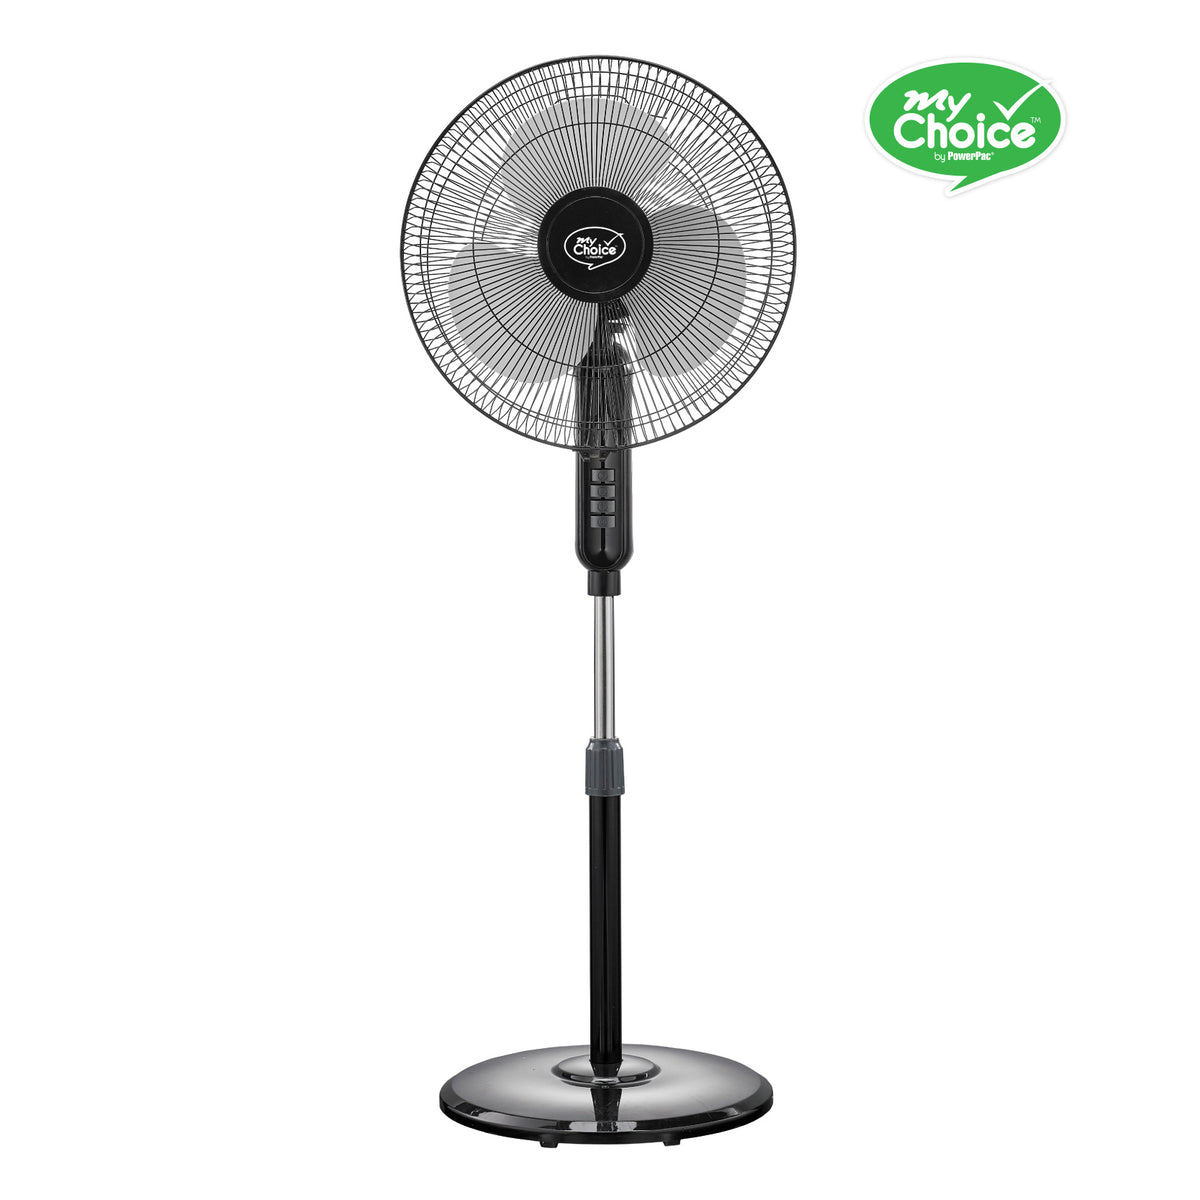 My Choice Stand Fan 16&quot; with Oscillation (MC40) - PowerPacSG